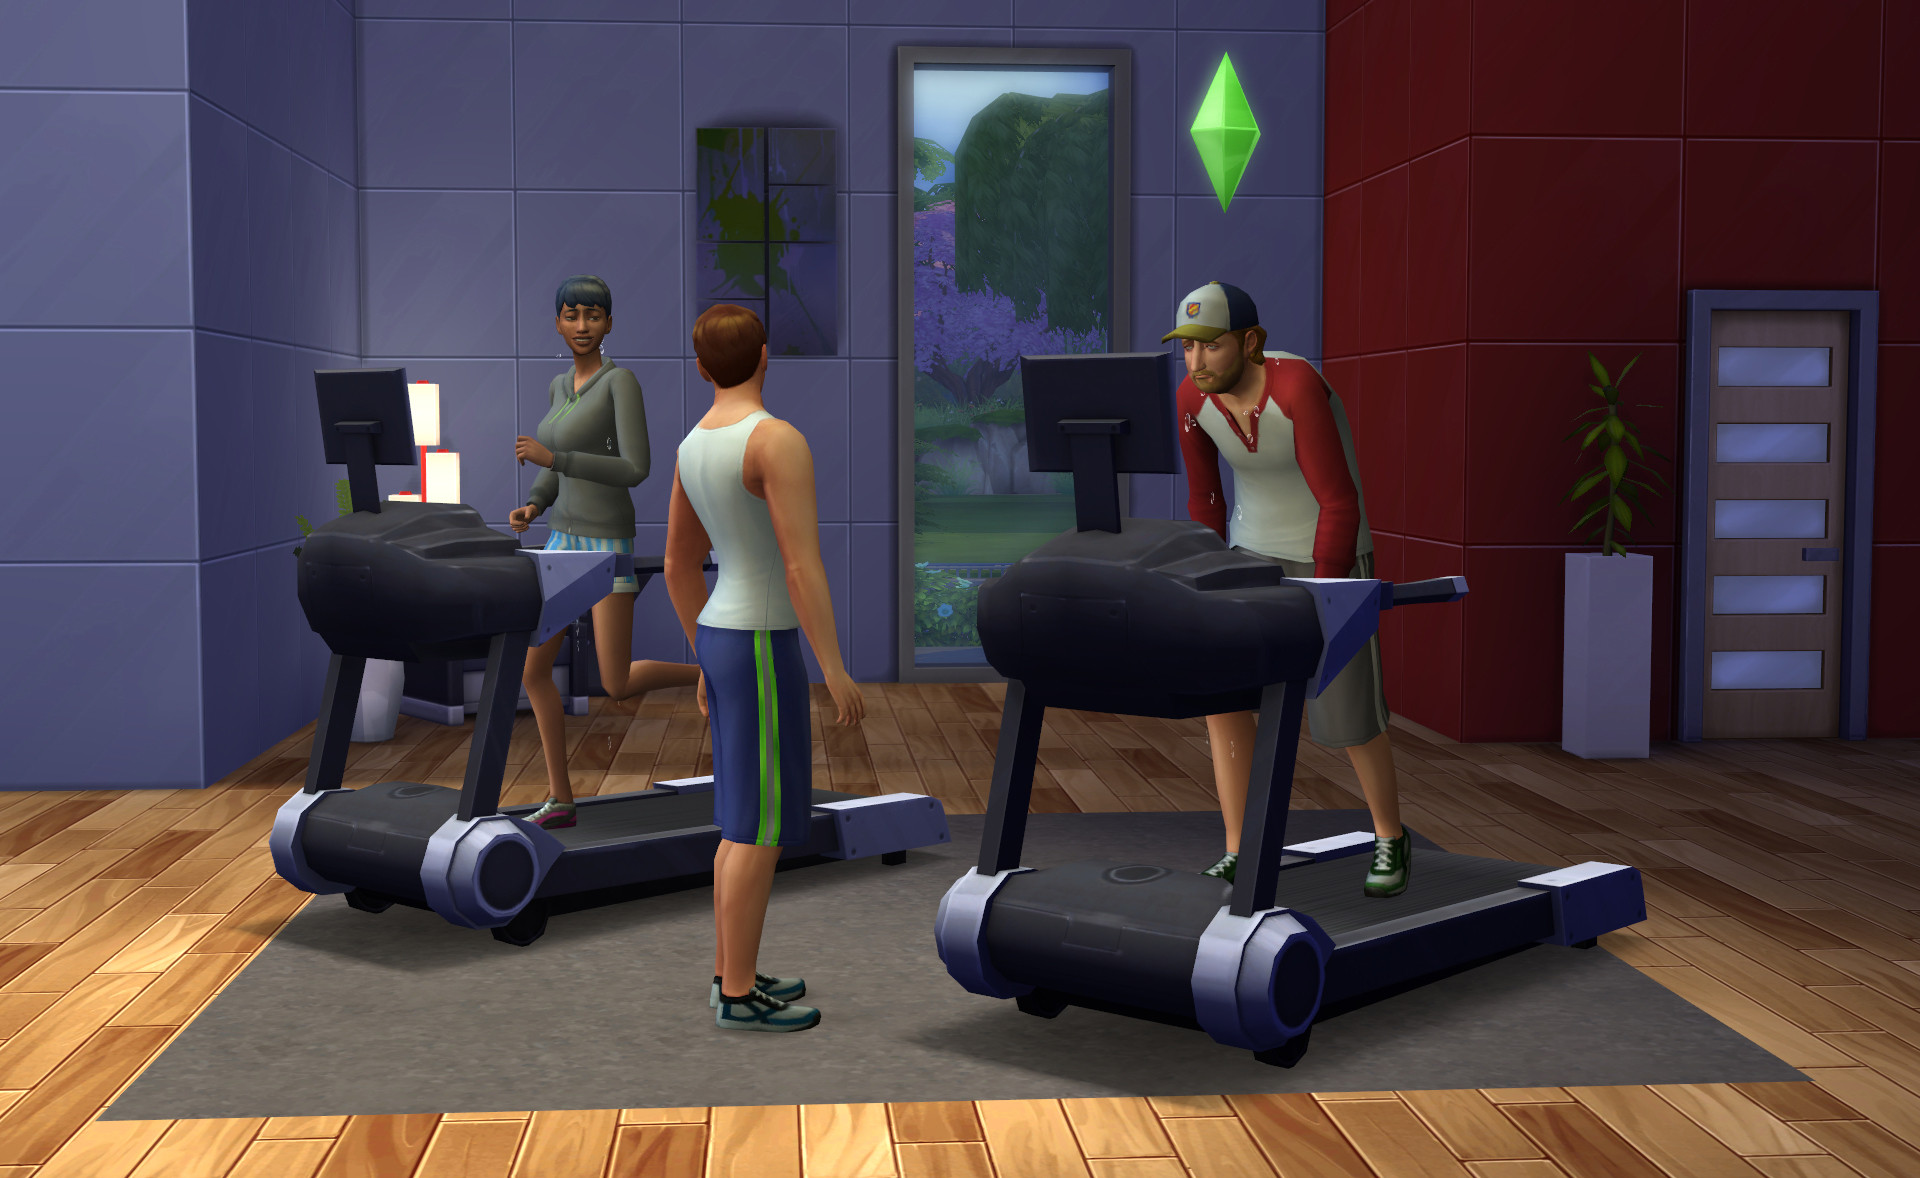 1920x1178 Sims 4 images Sims 4 Screenshots HD wallpaper and background photos